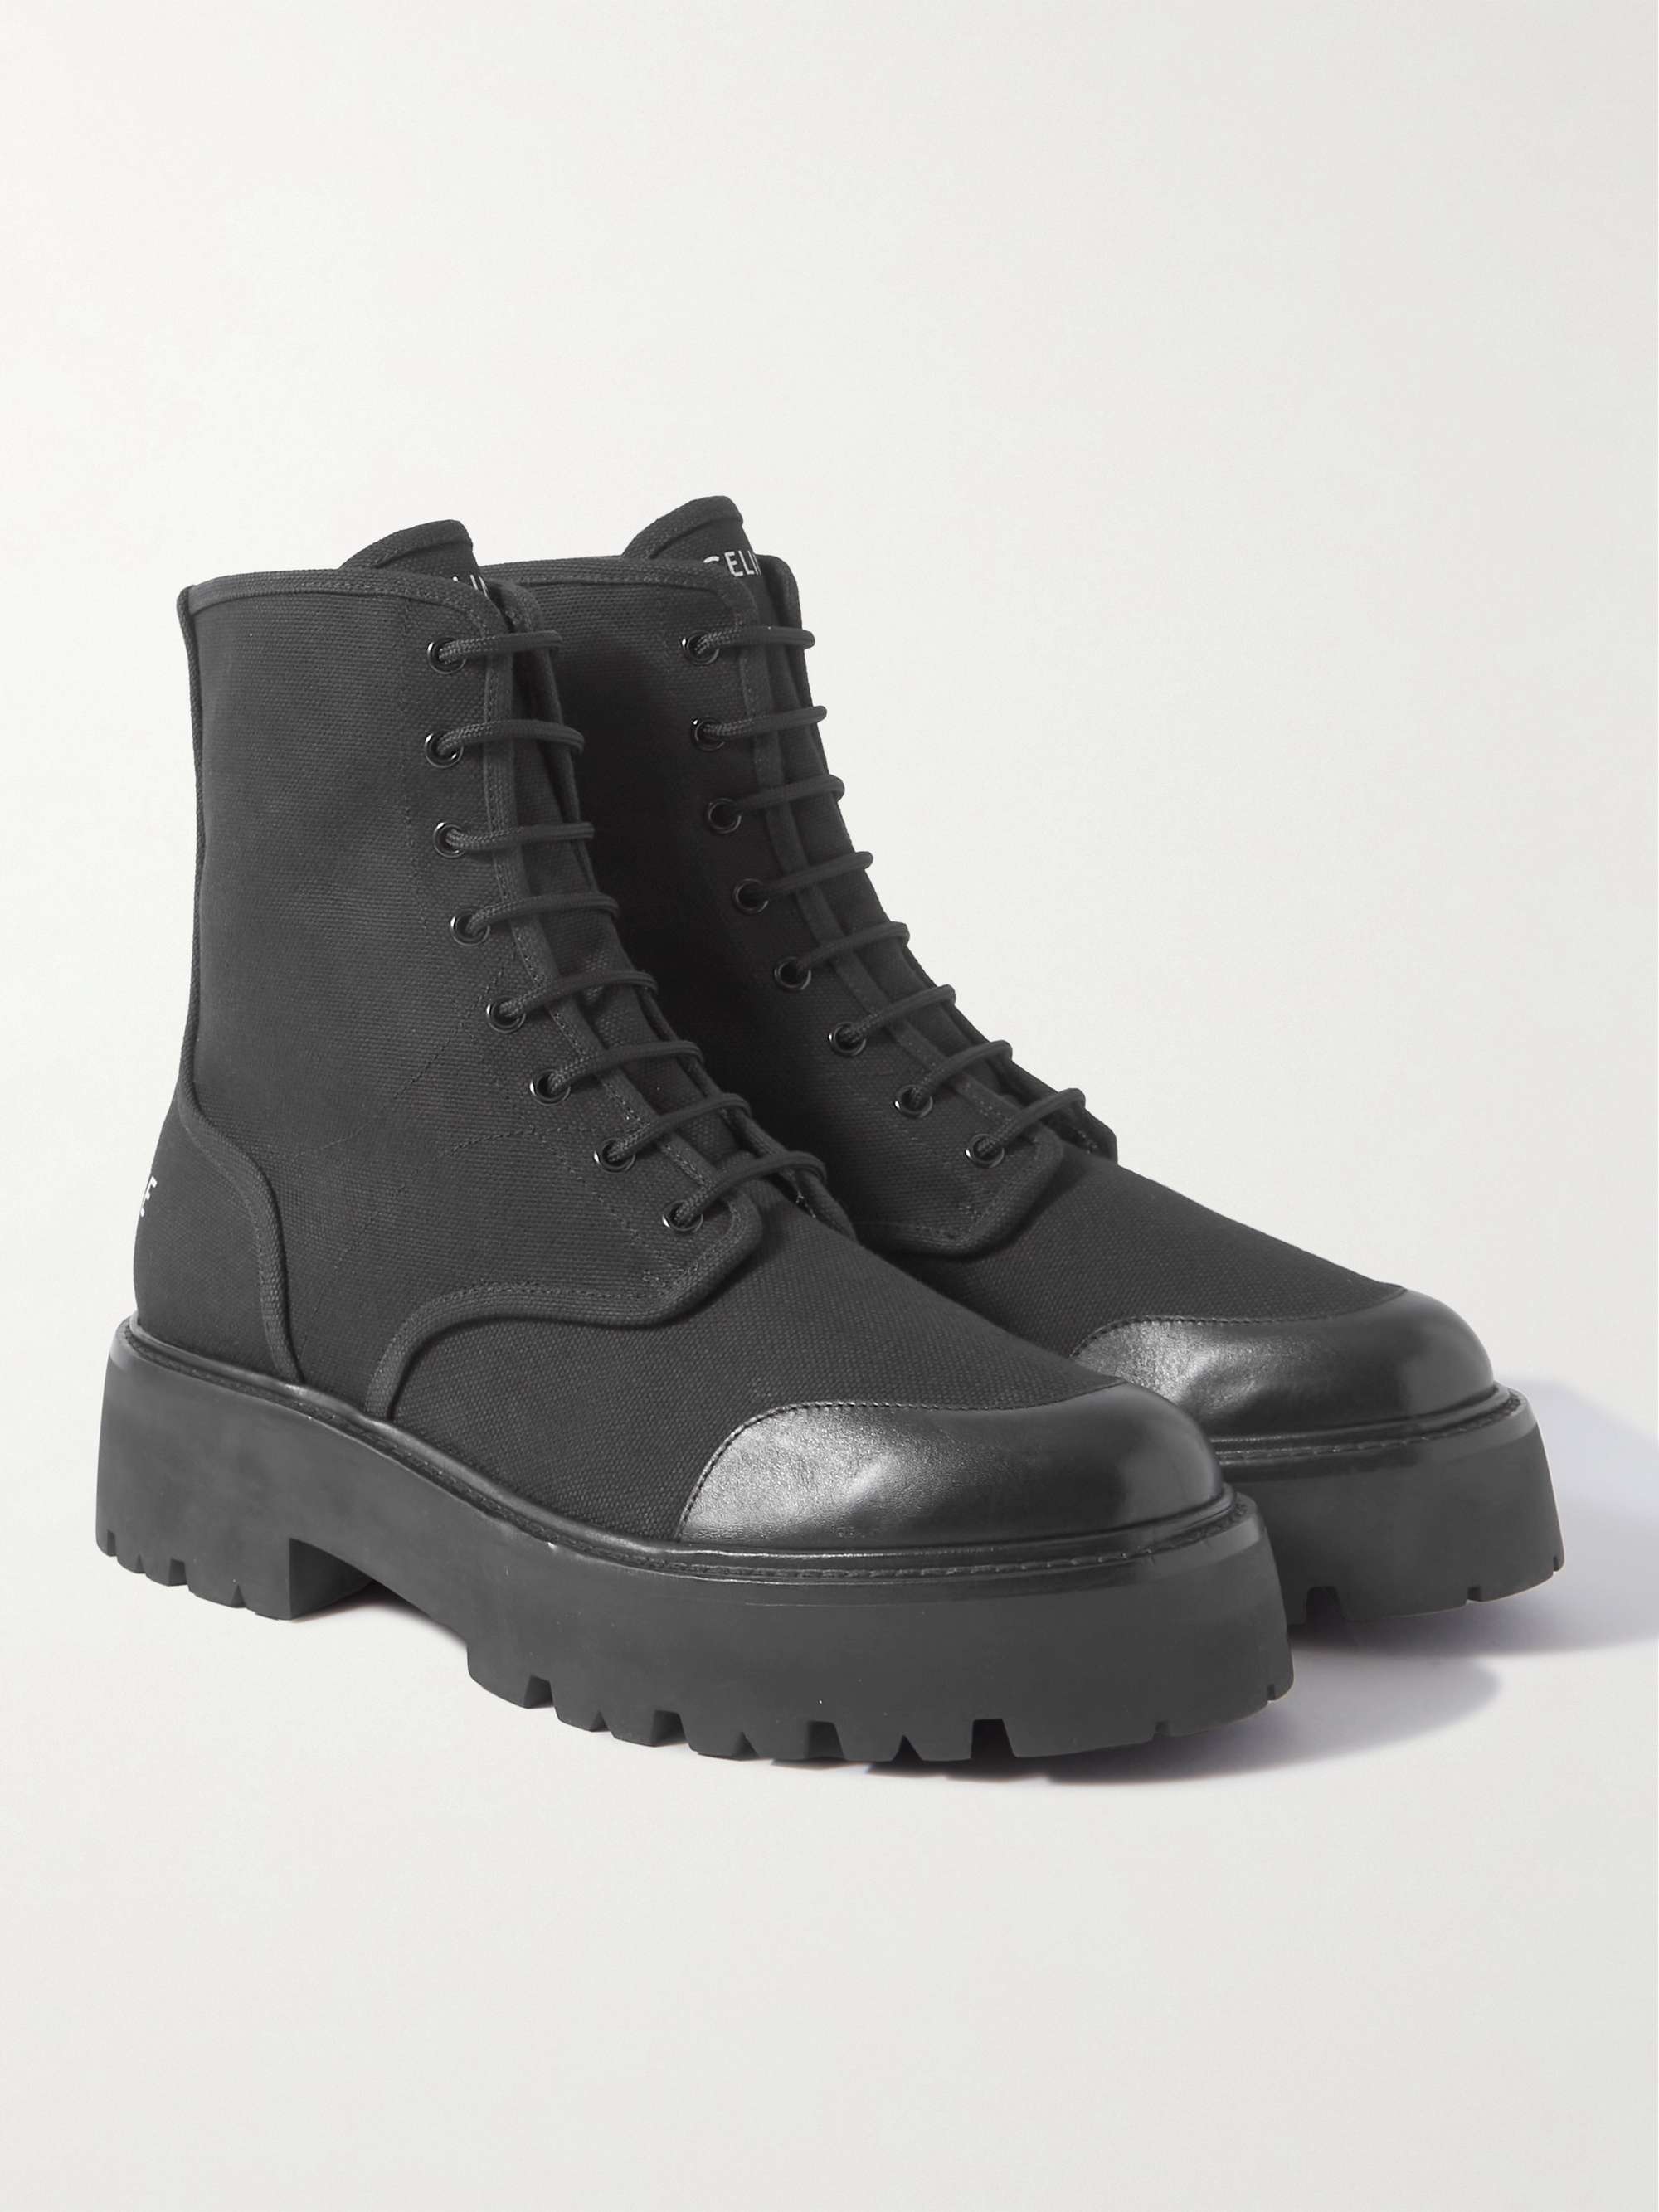 CELINE HOMME Leather-Trimmed Canvas Boots